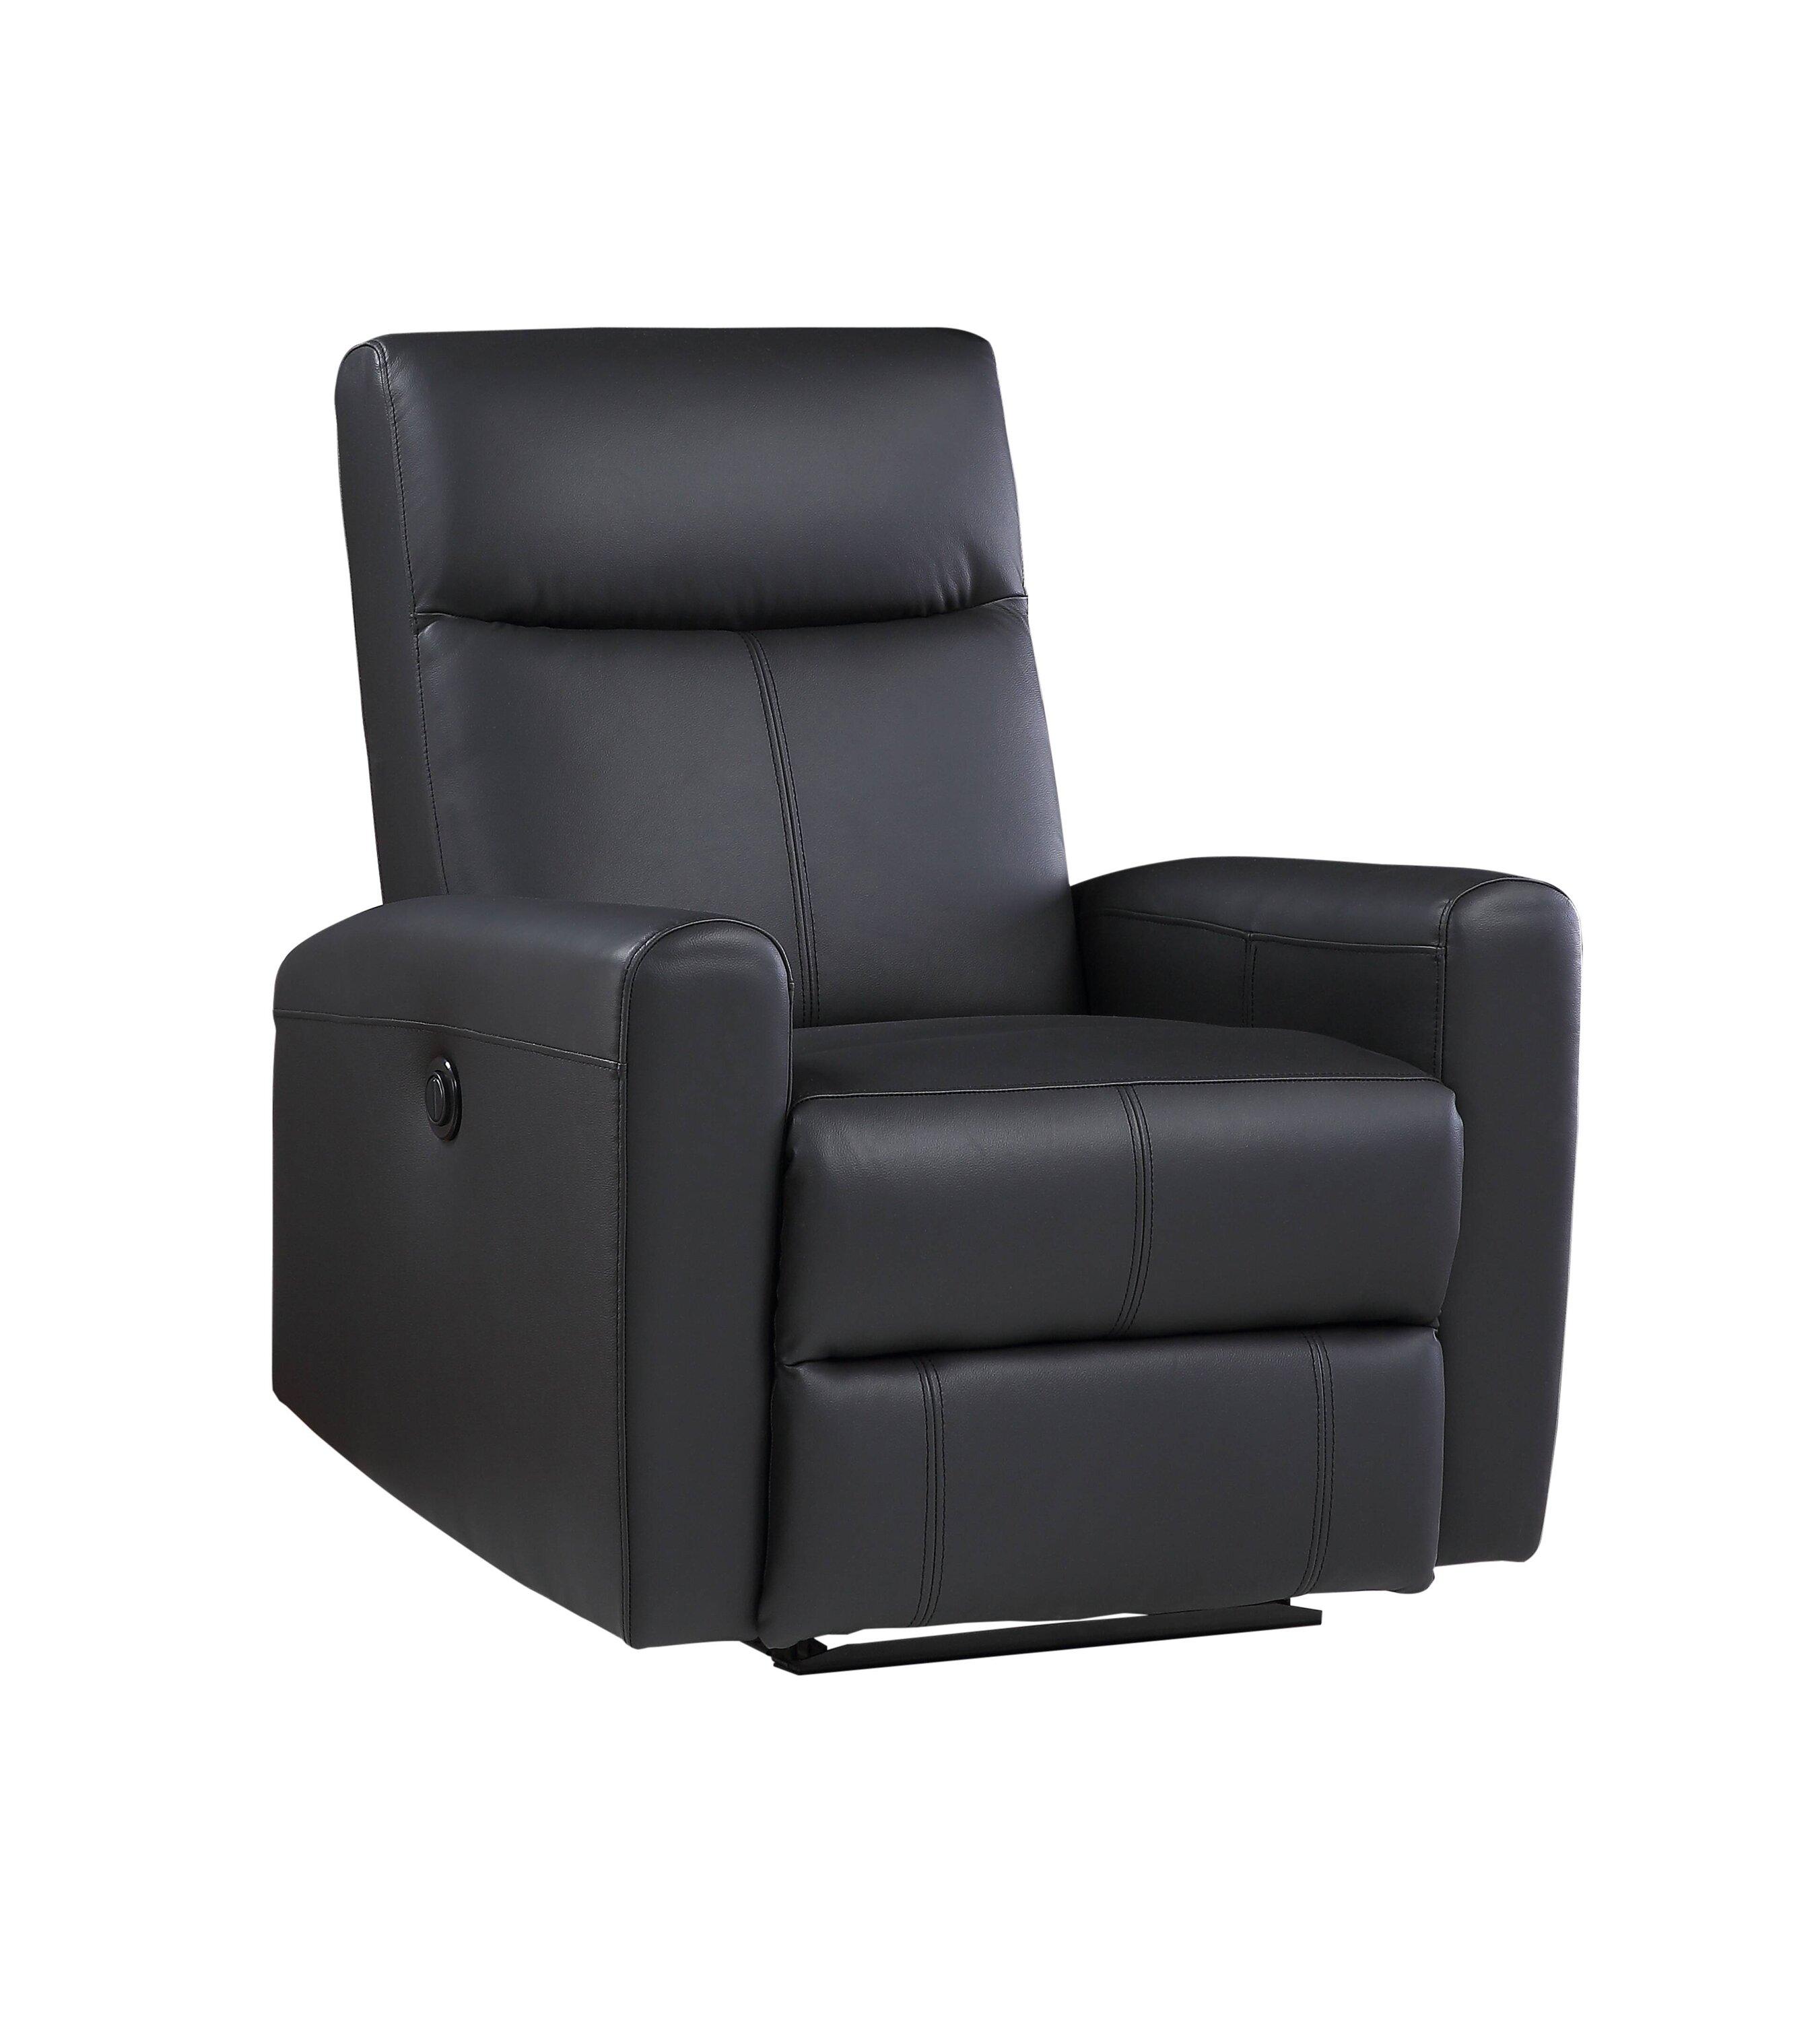 Contemporary Recliner Blane 59686 in Black Top grain leather